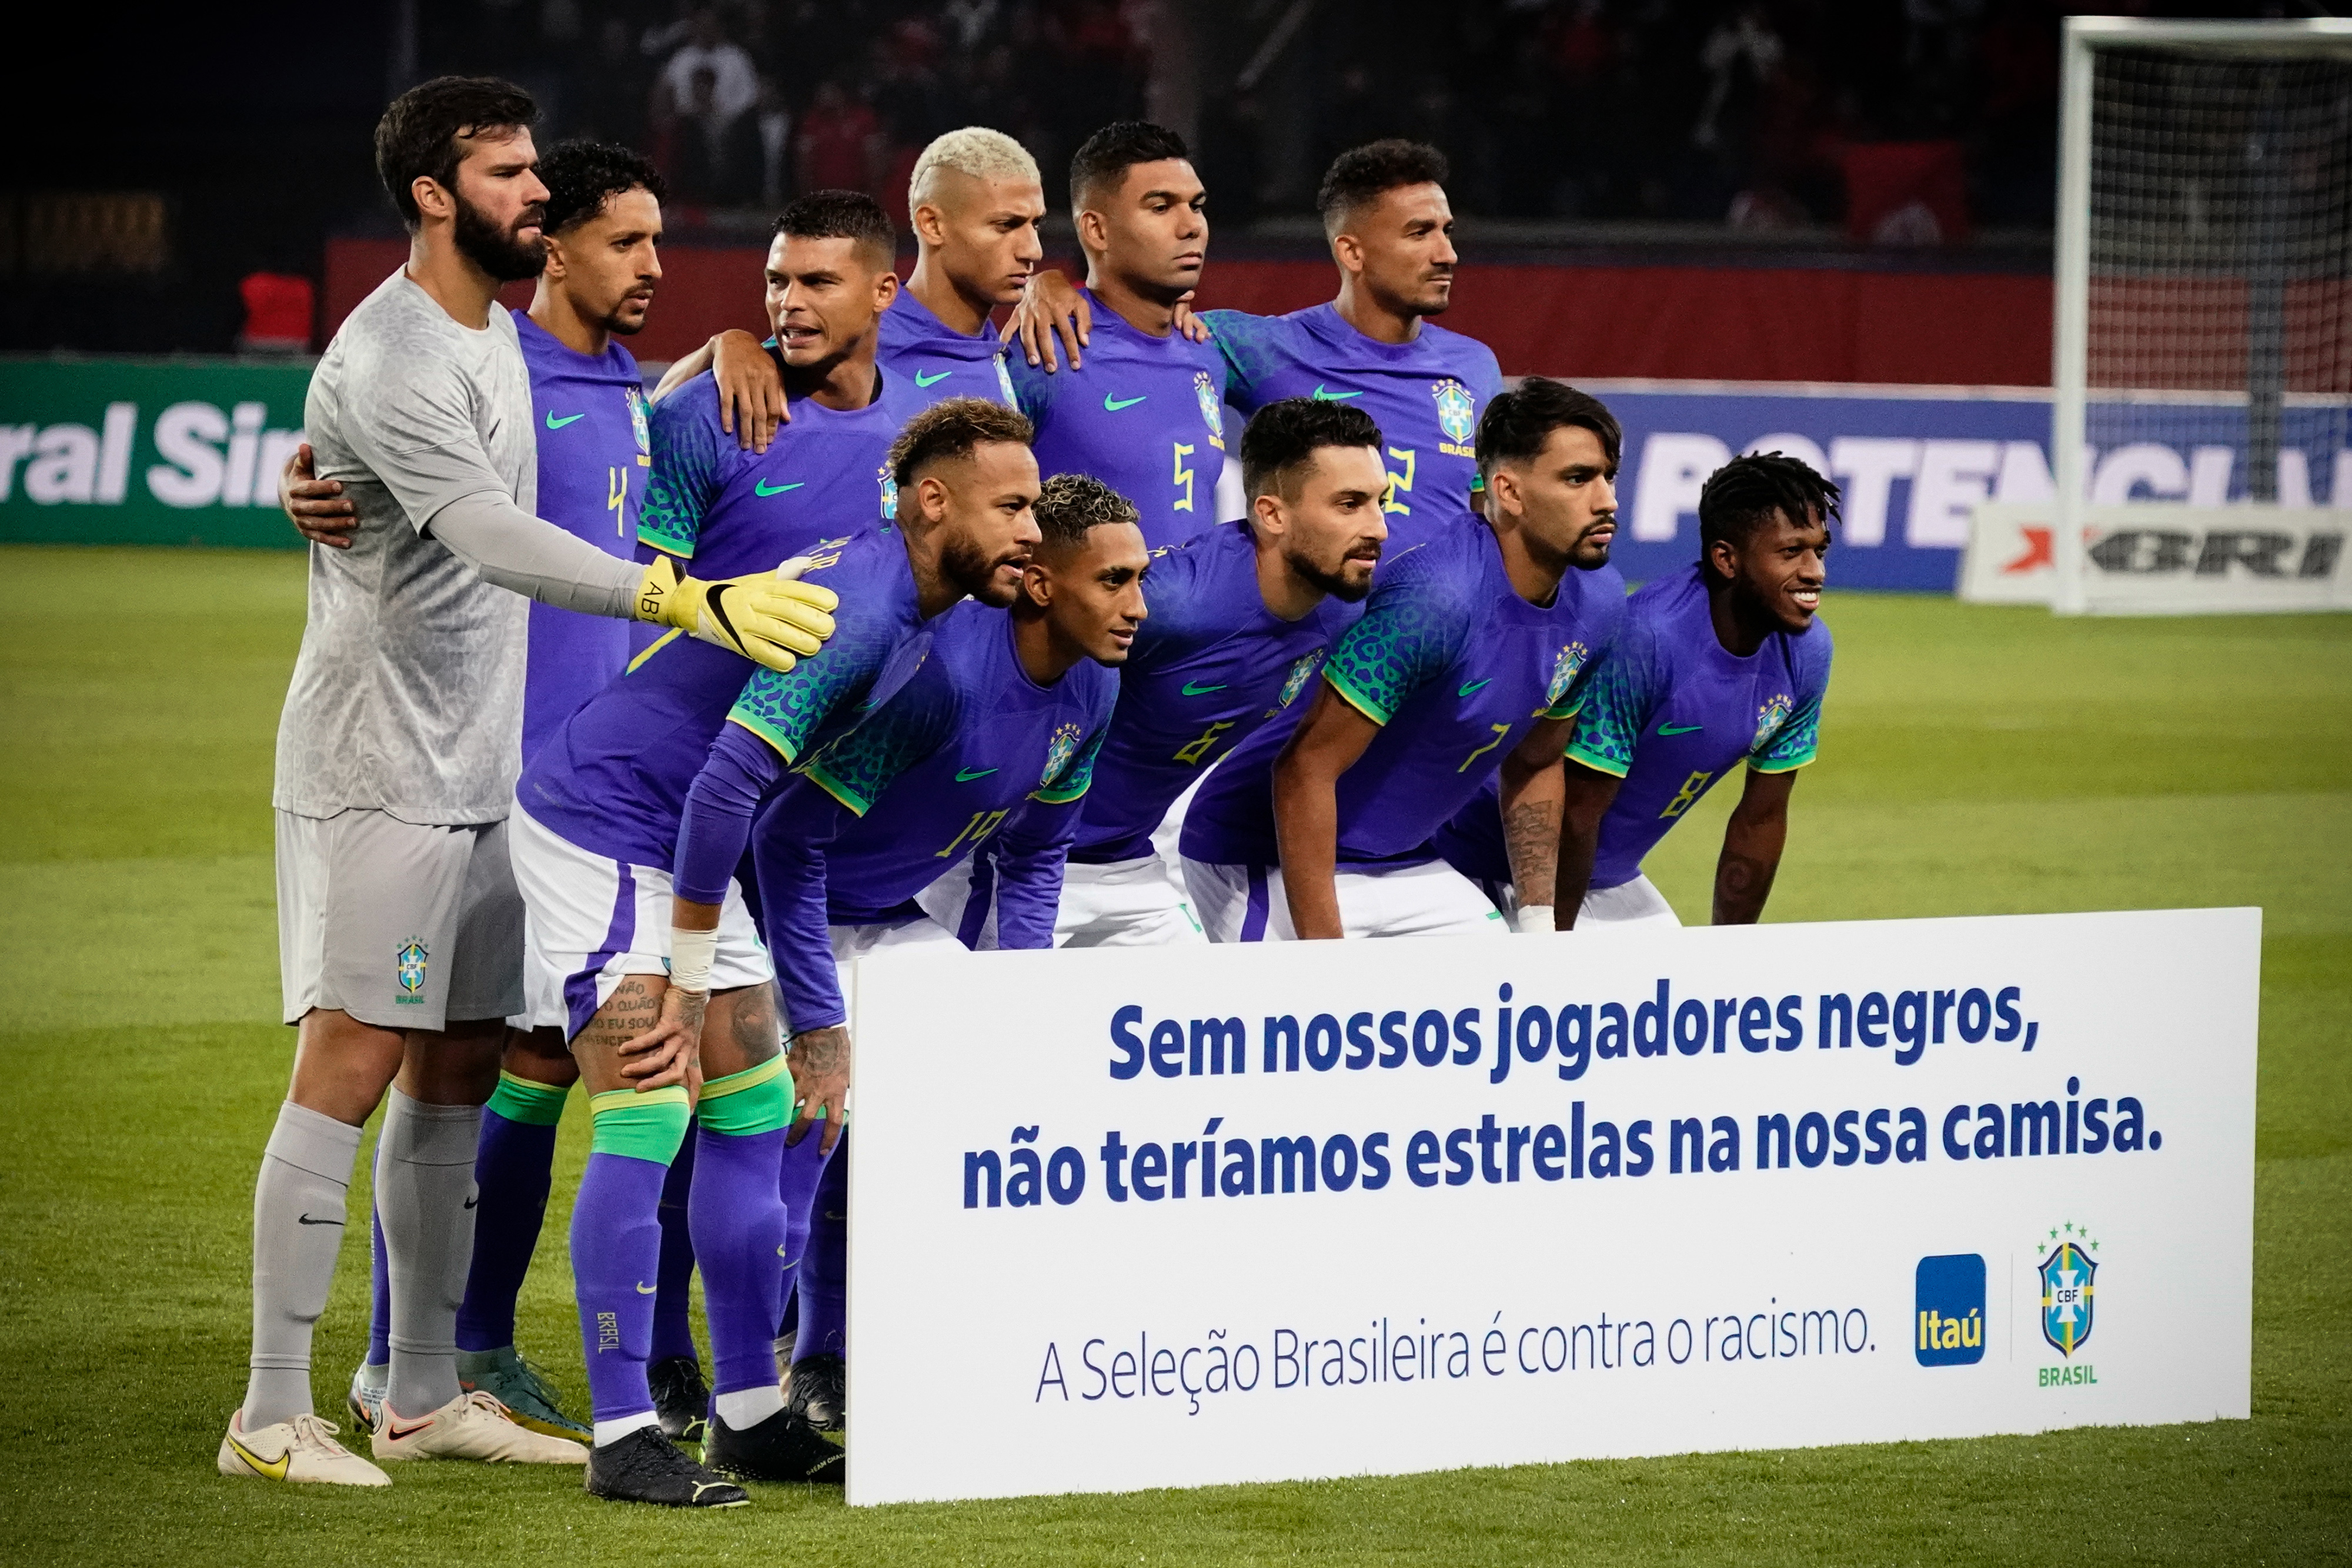 Brazil players pose with an anti-racism banner.